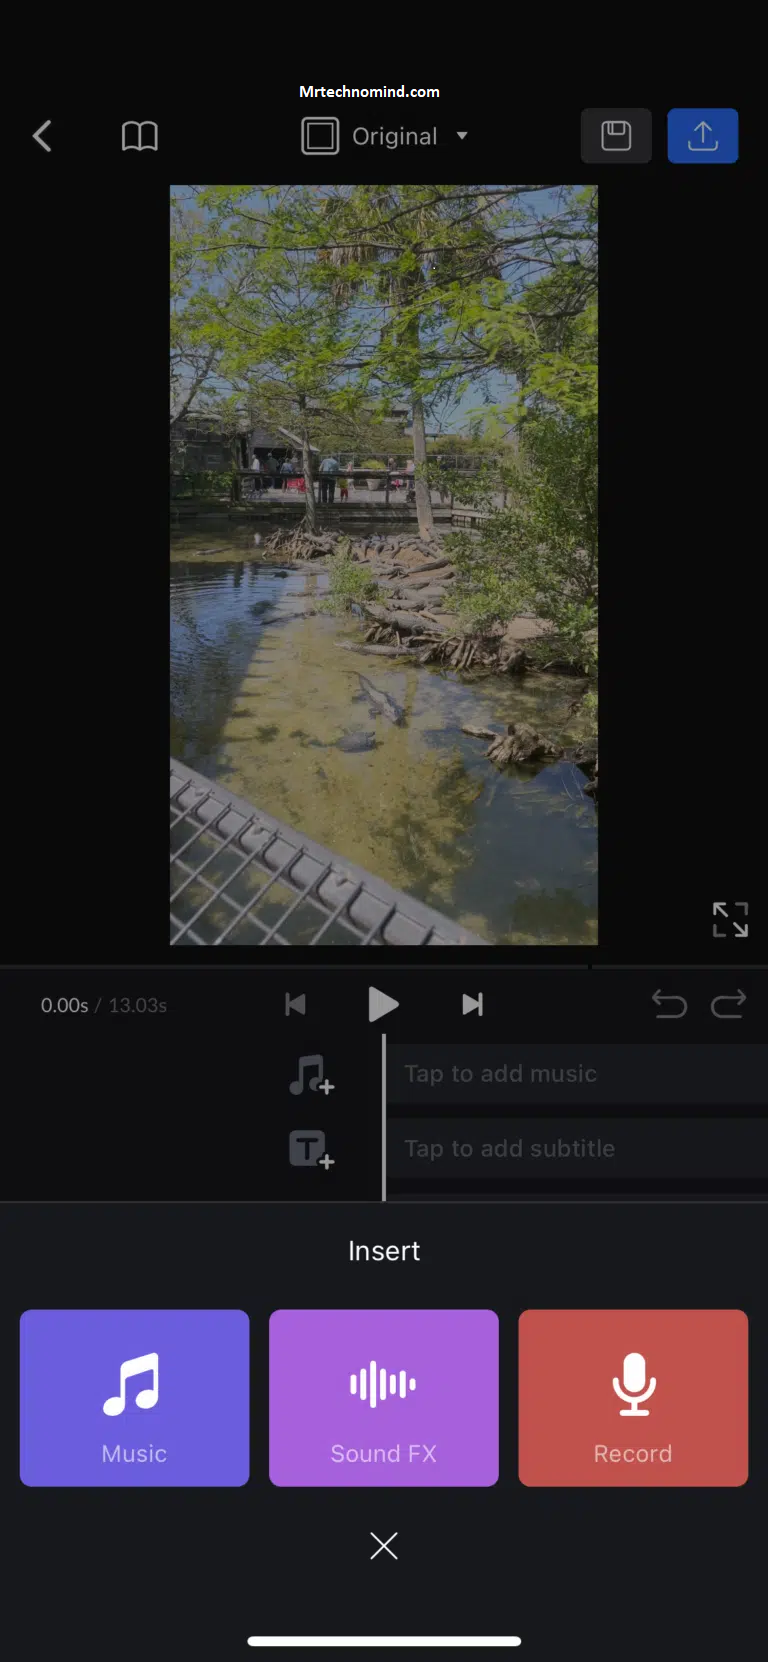 Go to the Audio Tab and Select Extract Audio